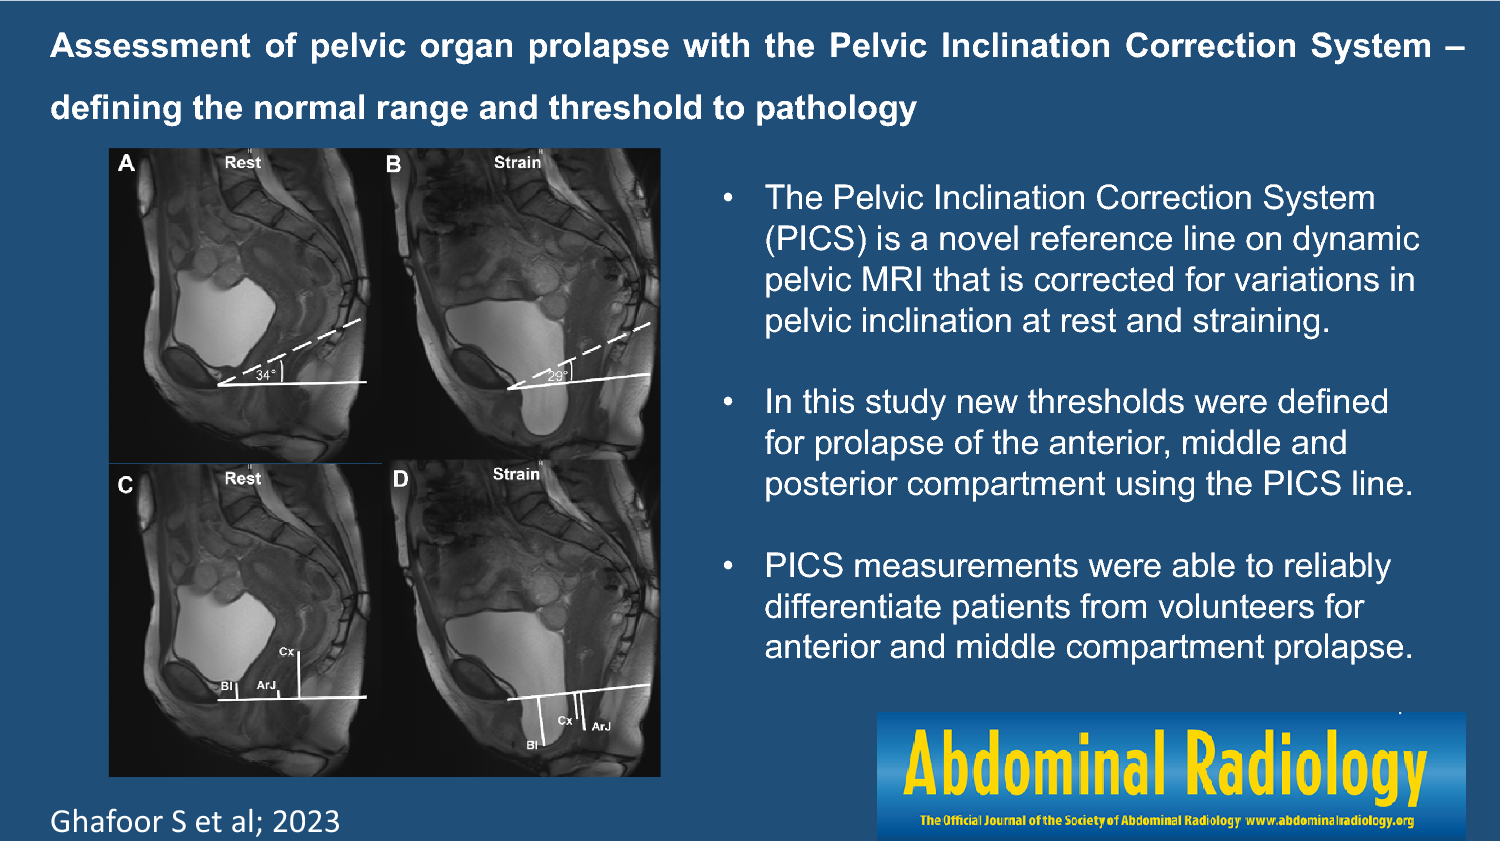 Assessment of pelvic organ prolapse with the Pelvic Inclination Correction System: defining the normal range and threshold to pathology